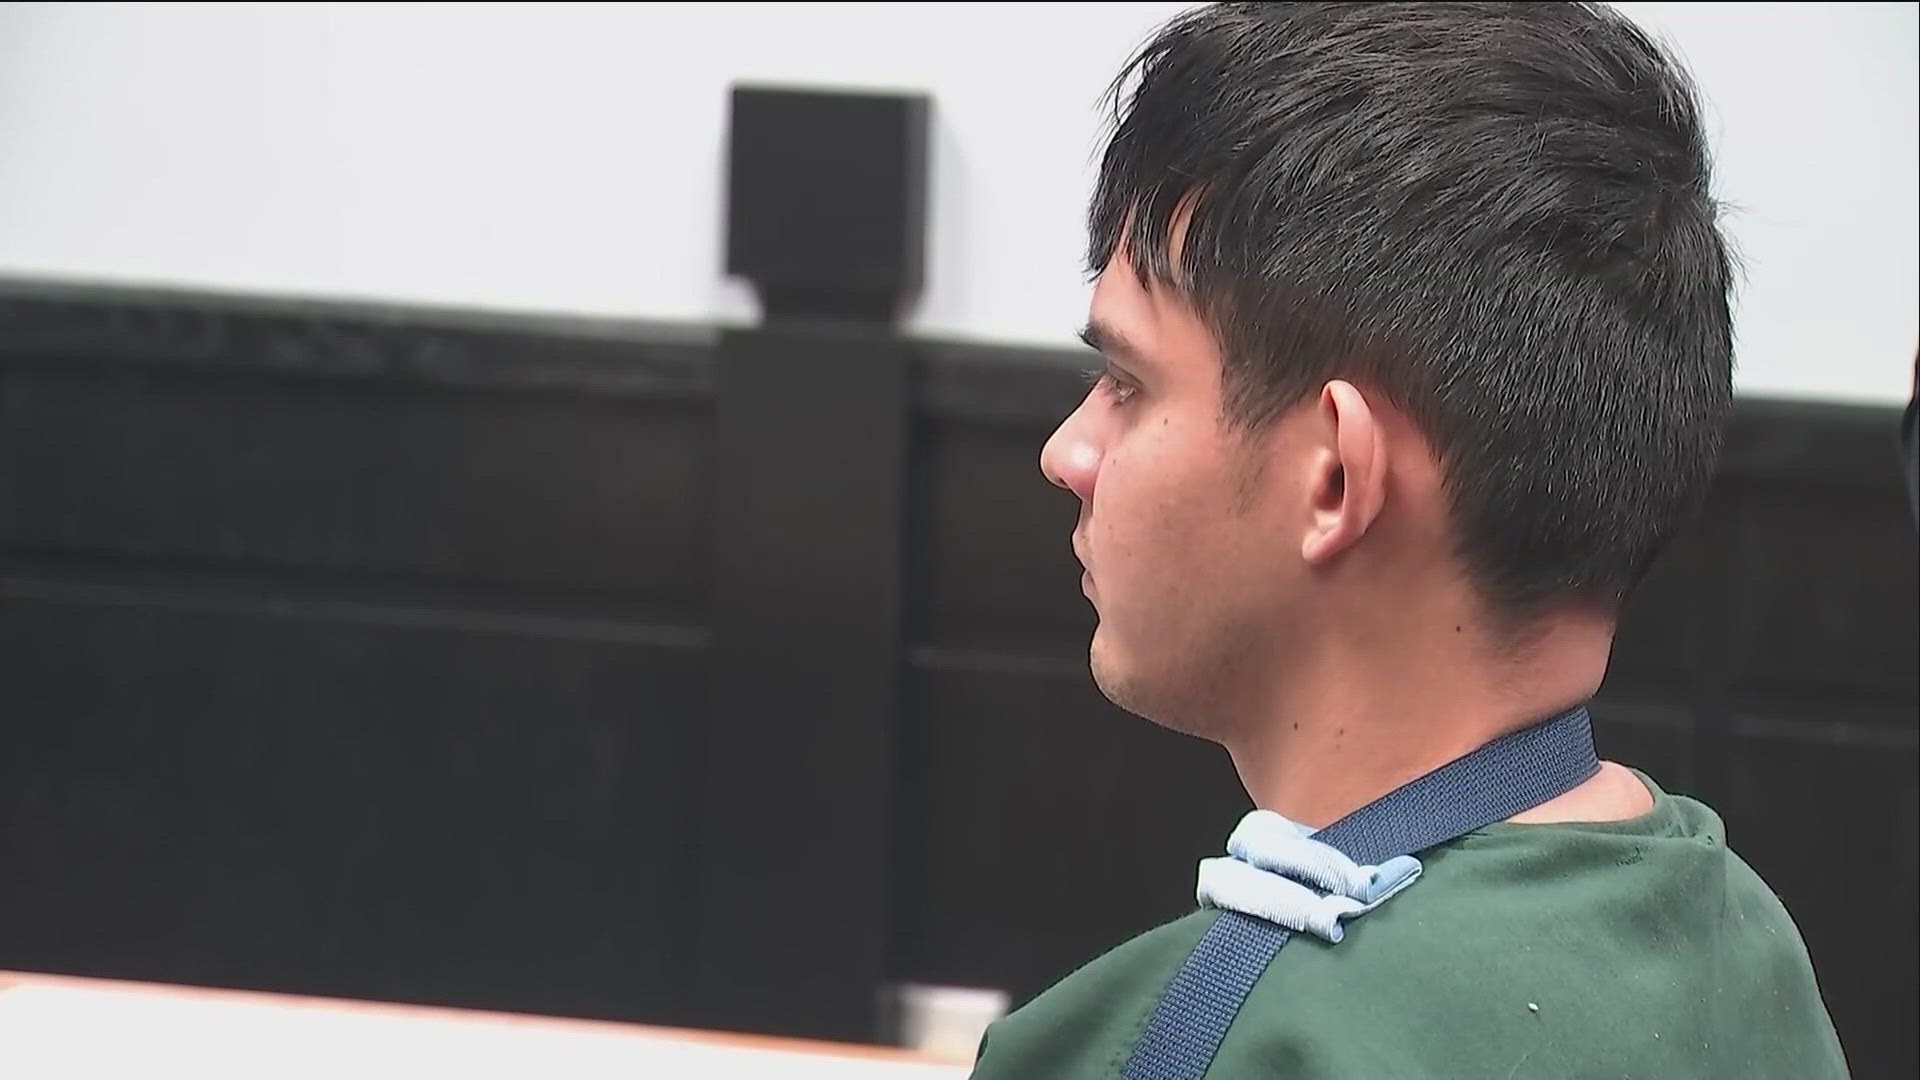 Gerson Ayala-Rodriguez is accused in the death of GSP Trooper Jimmy Cenescar after a high-speed chase on January 28.